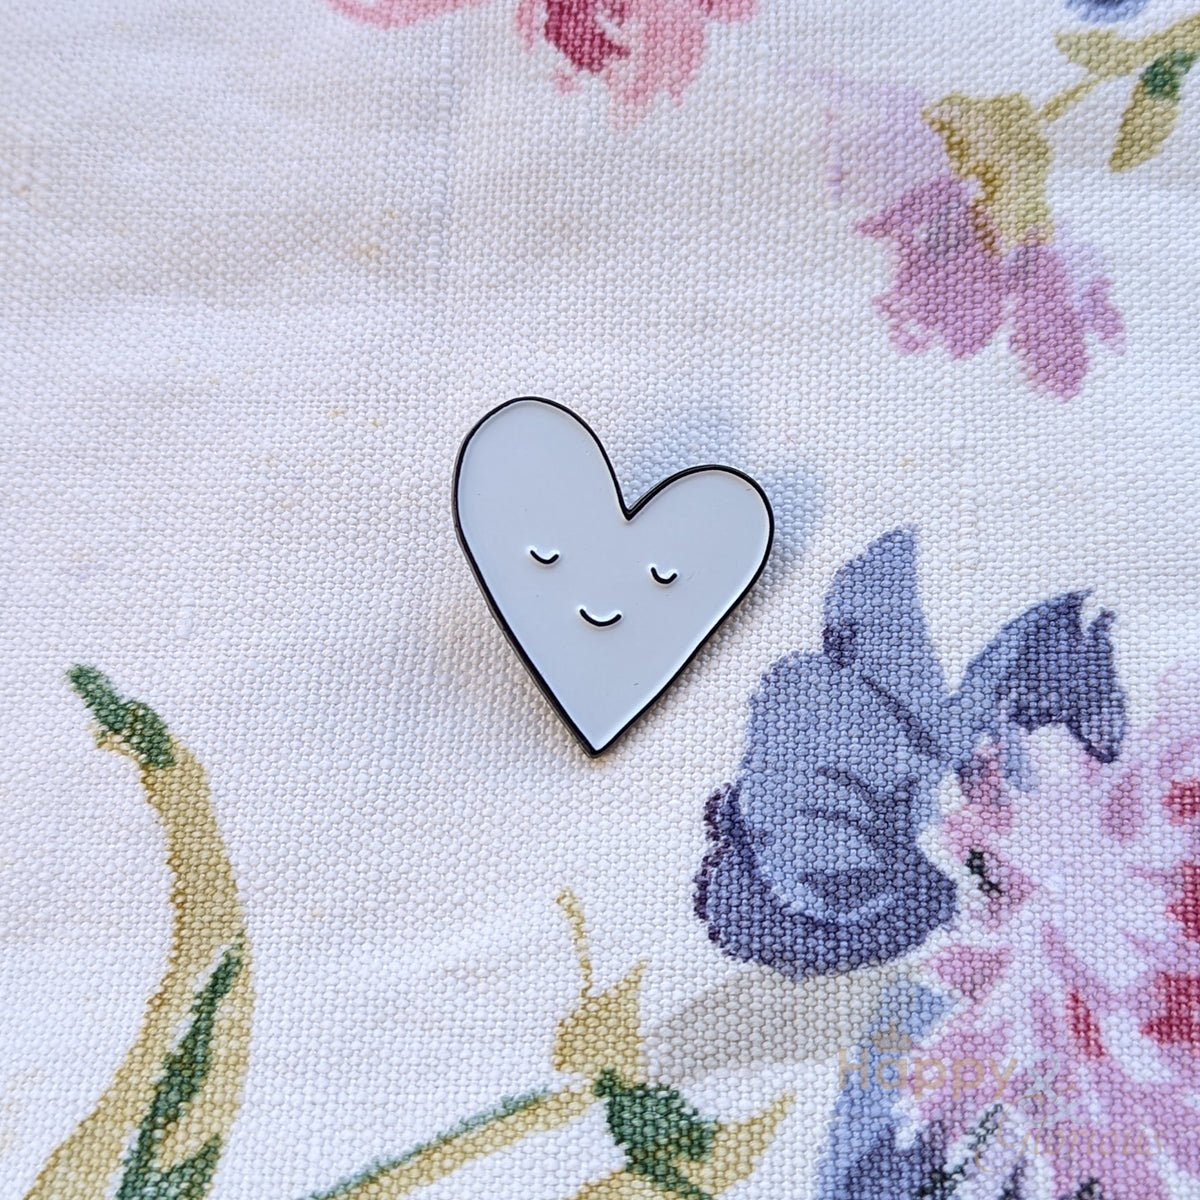 Smiling heart positive pin badge